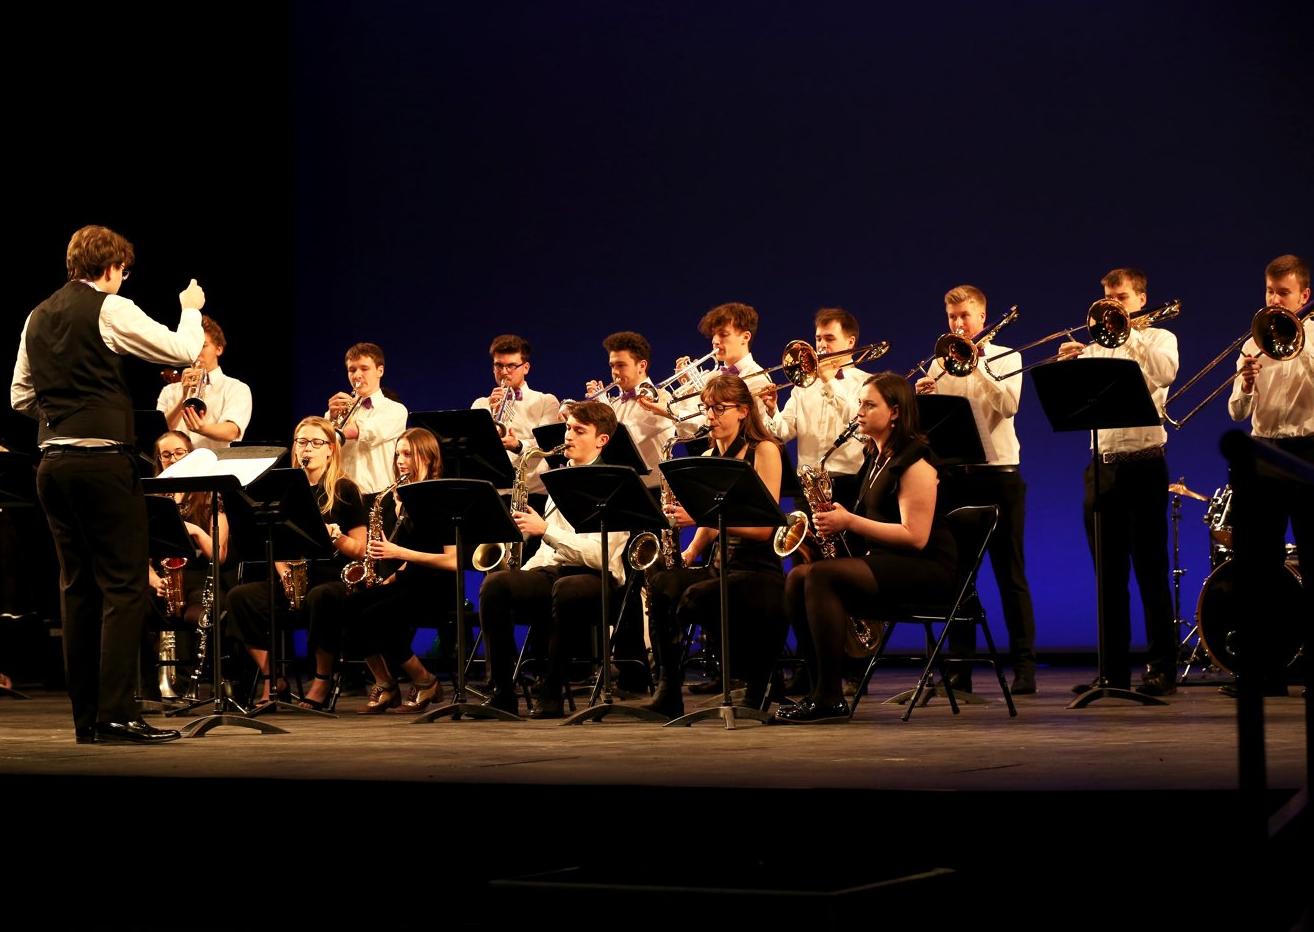 The Lewes Youth Band, accompanied by soloist Khaya Burke who has recorded Elvis Presley's Love Me Tender with Guy Fletcher of Dire Straits. Photograph: 
Photograph: Sam Stephenson/ Homelink